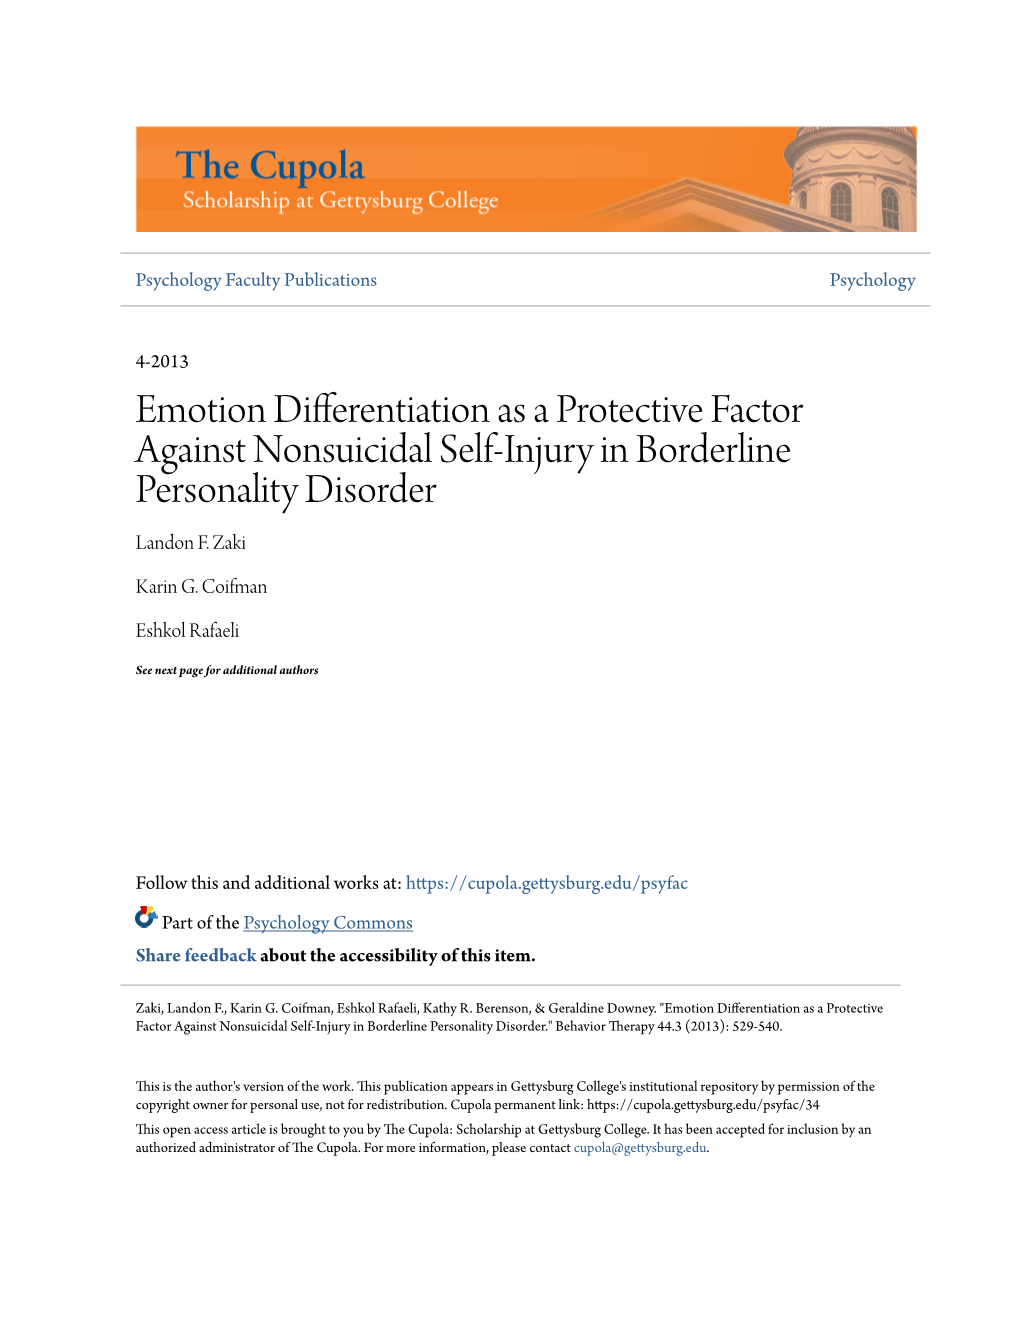 Emotion Differentiation As a Protective Factor Against Nonsuicidal Self-Injury in Borderline Personality Disorder Landon F